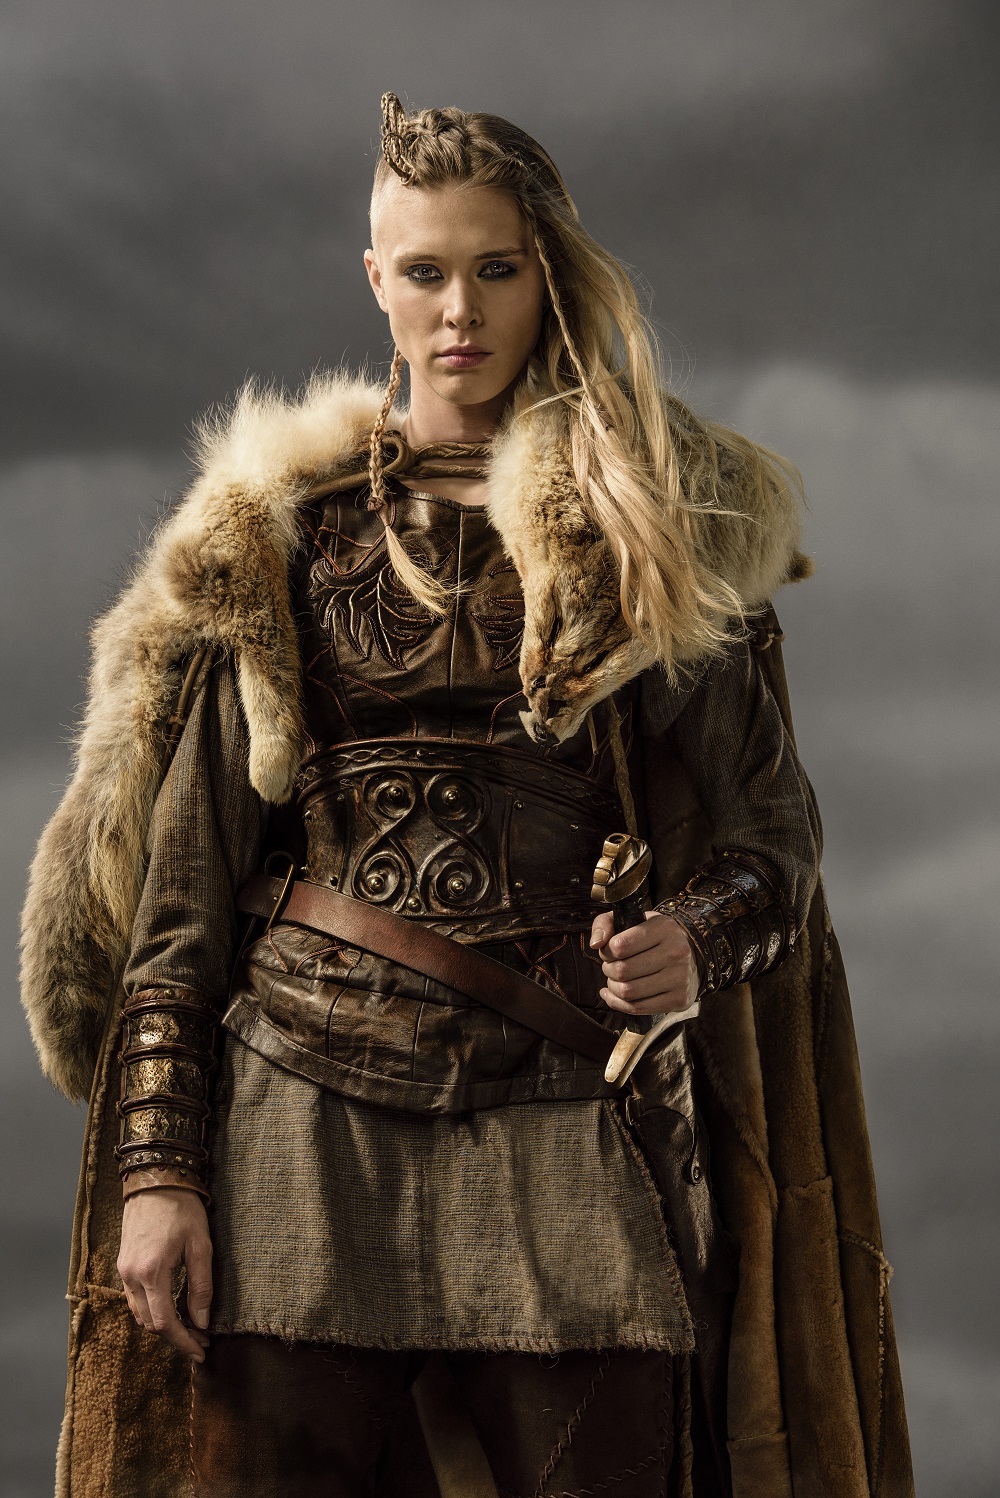 She was not a she”: a Vikings' vision of the Orient – Morgane Flahault